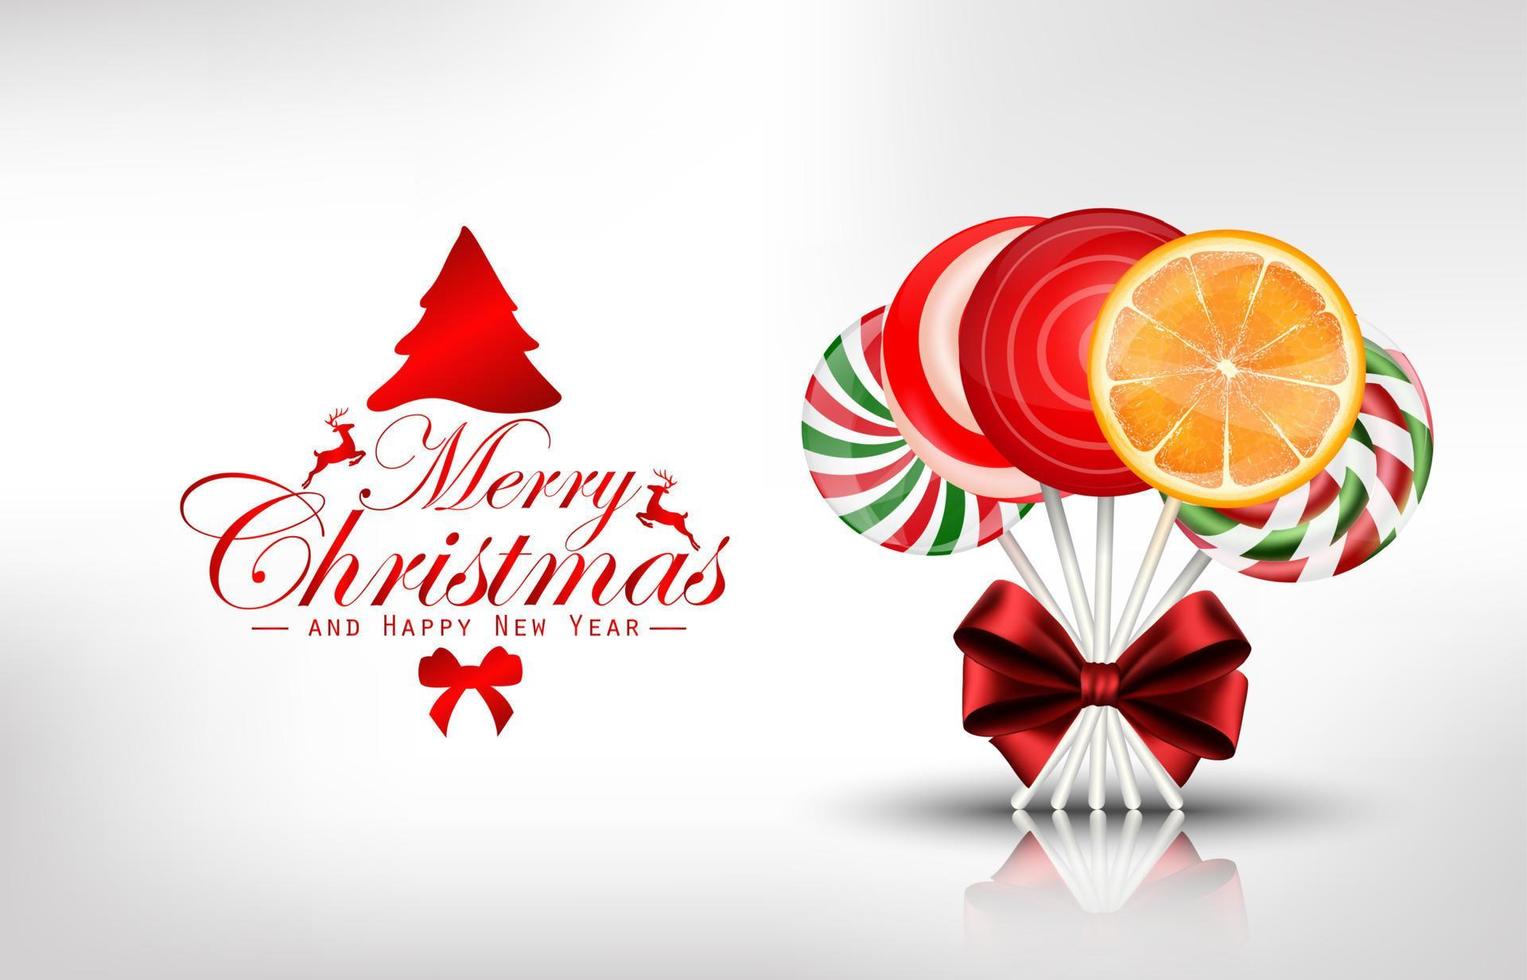 Christmas background with lollipop and orange slice vector